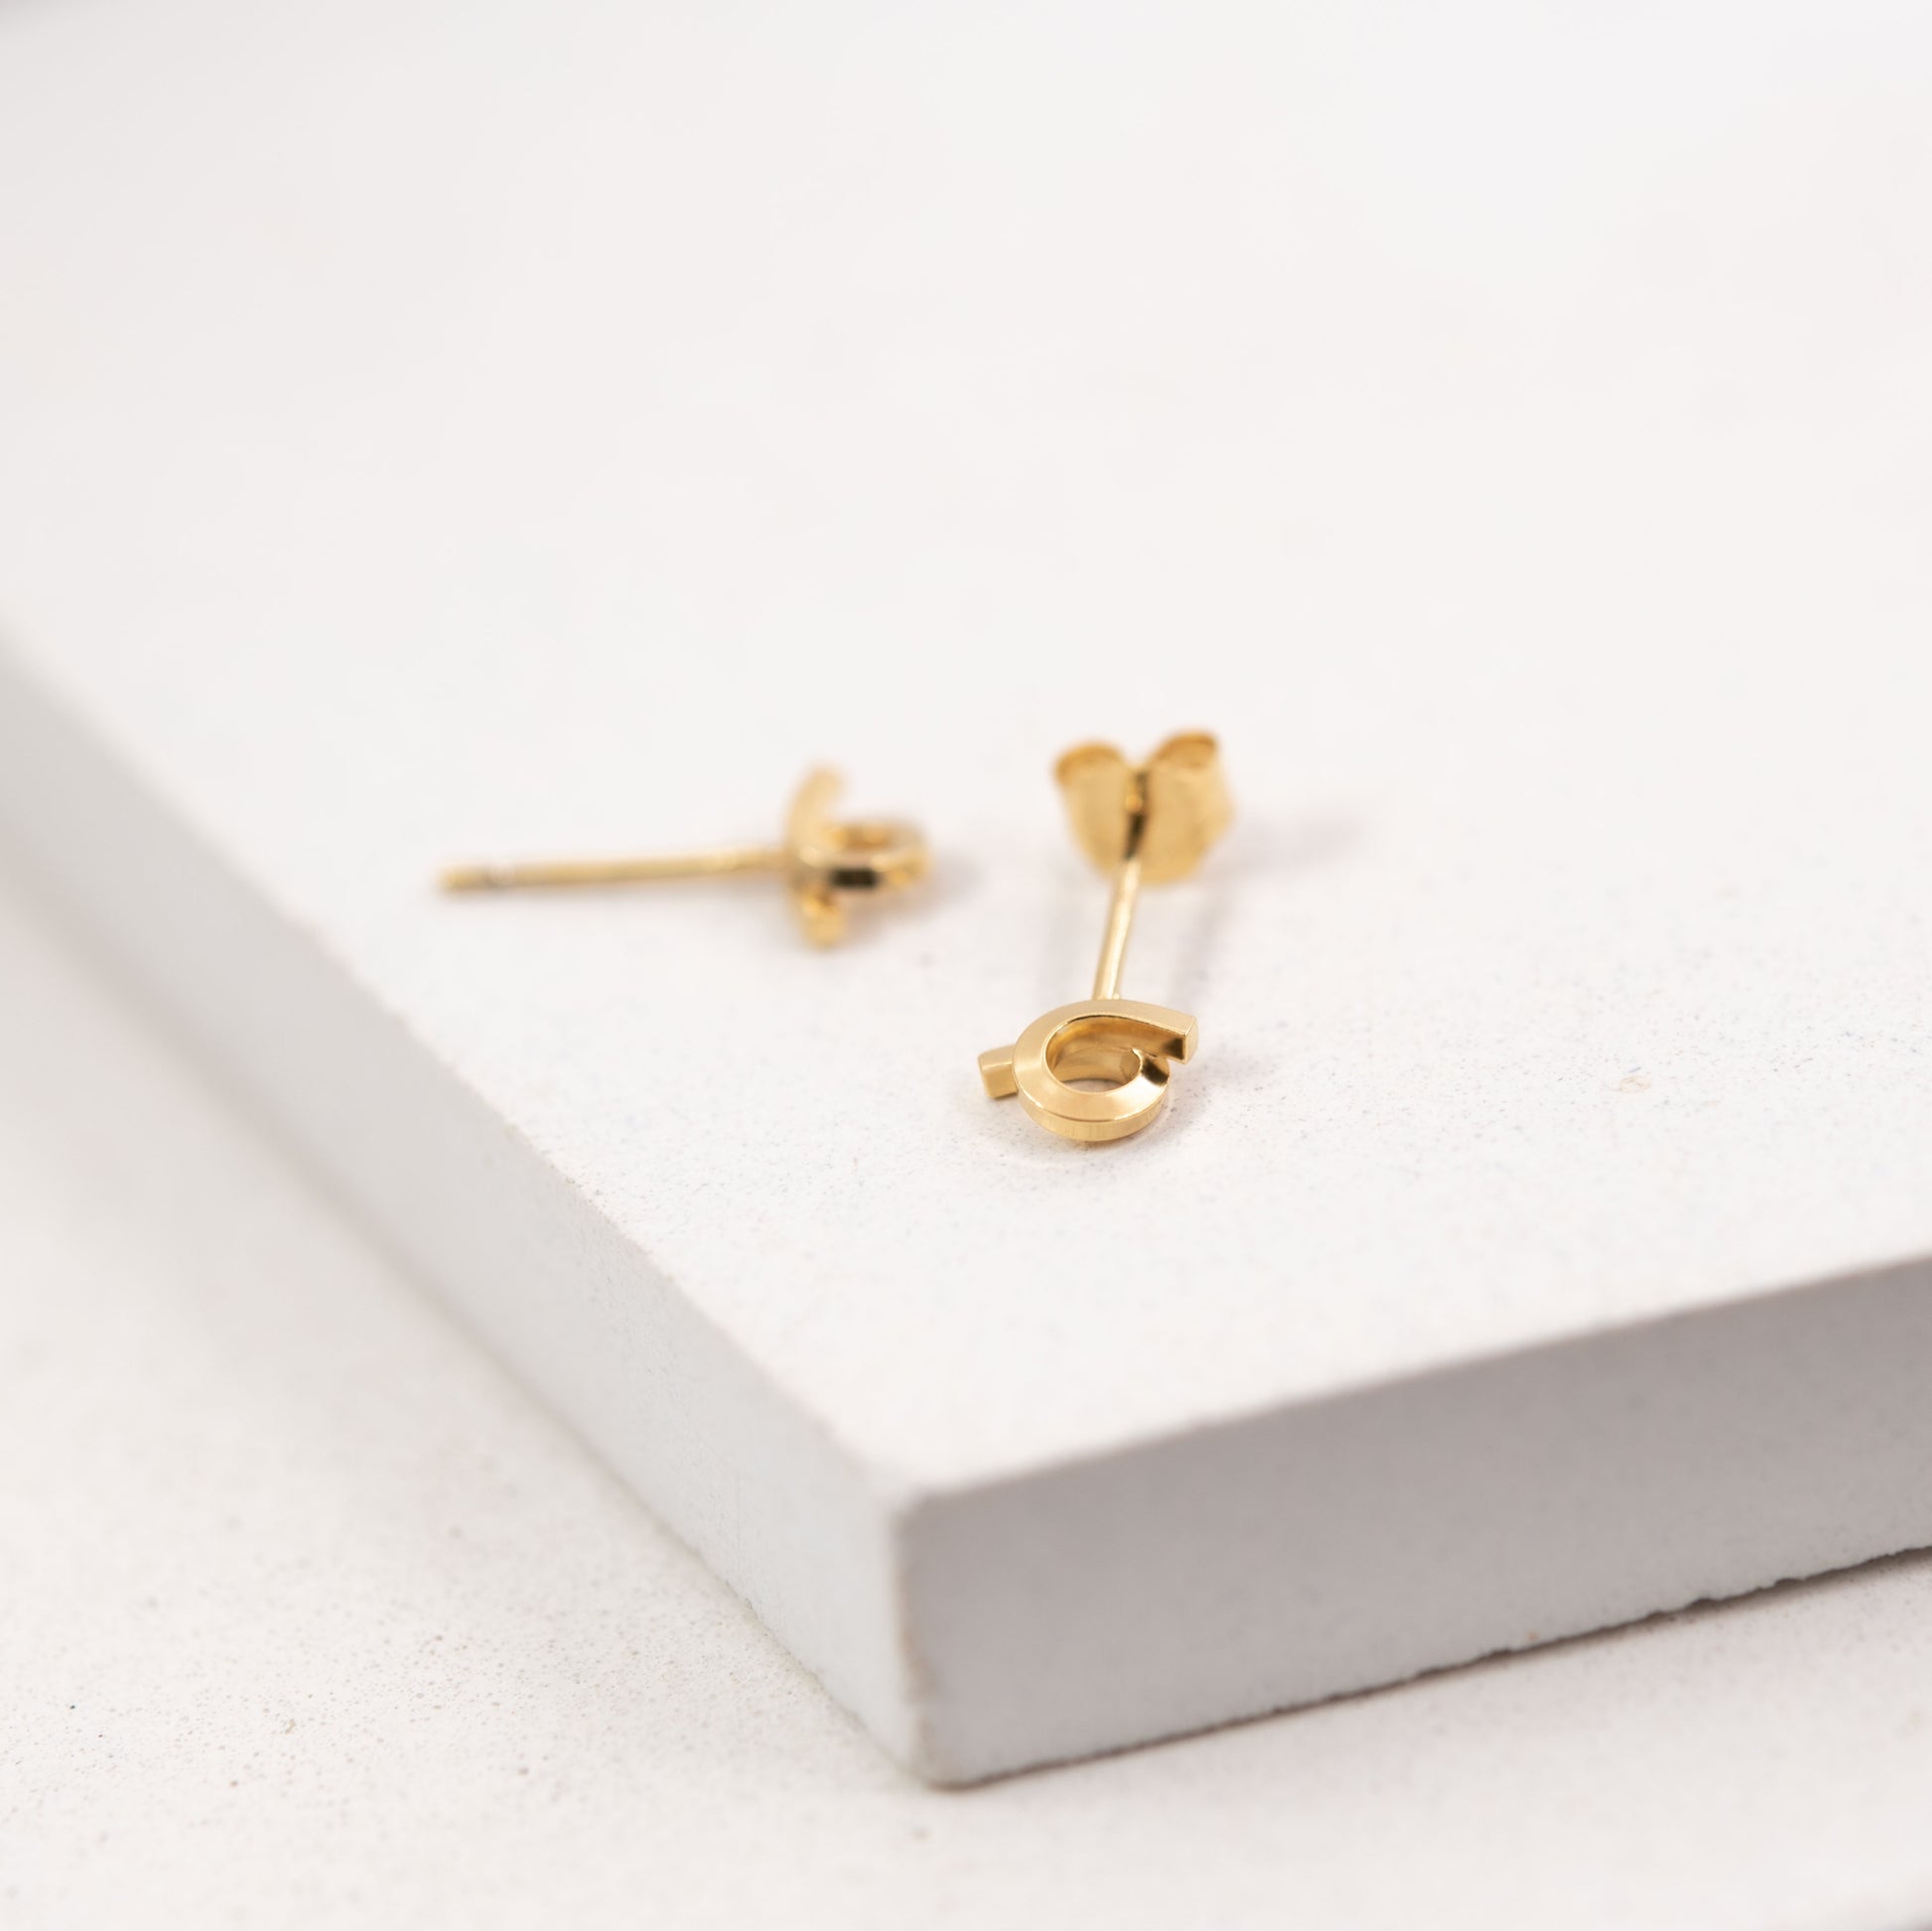 Tiny loop studs earrings crafted by hand from a 1,5 mm square wire of sterling silver and then shiny finished and gold plated. Length: 5 Millimeters; Width: 7 Millimeters